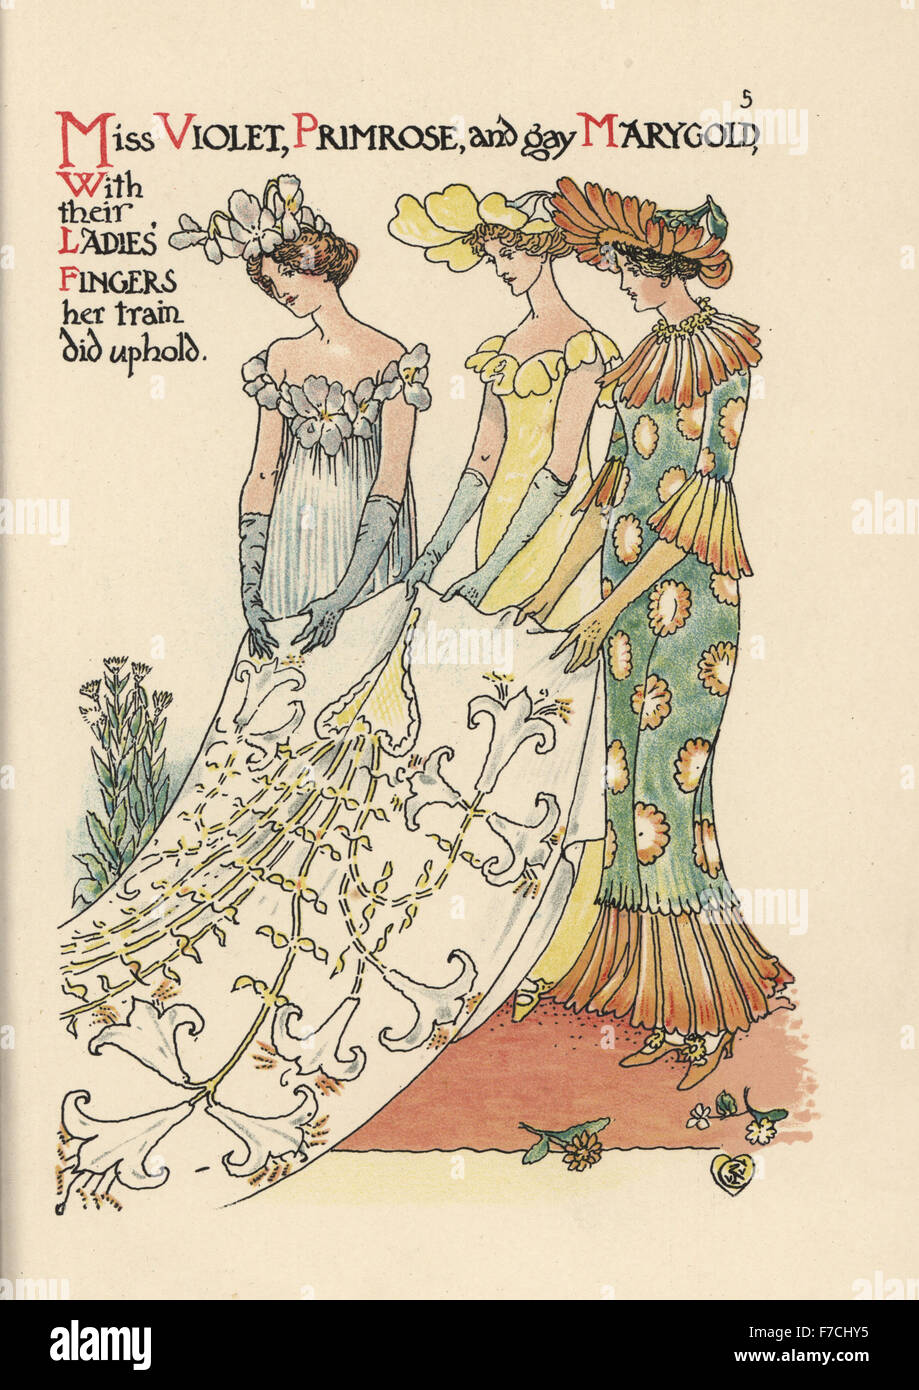 Flower fairies of violet, Viola odorata, primrose, Primula vulgaris, and marigold, Calendula officinalis, holding the bride's train decorated with lilies. Chromolithograph after an illustration by Walter Crane from A Flower Wedding, Cassell, London, 1905. Stock Photo